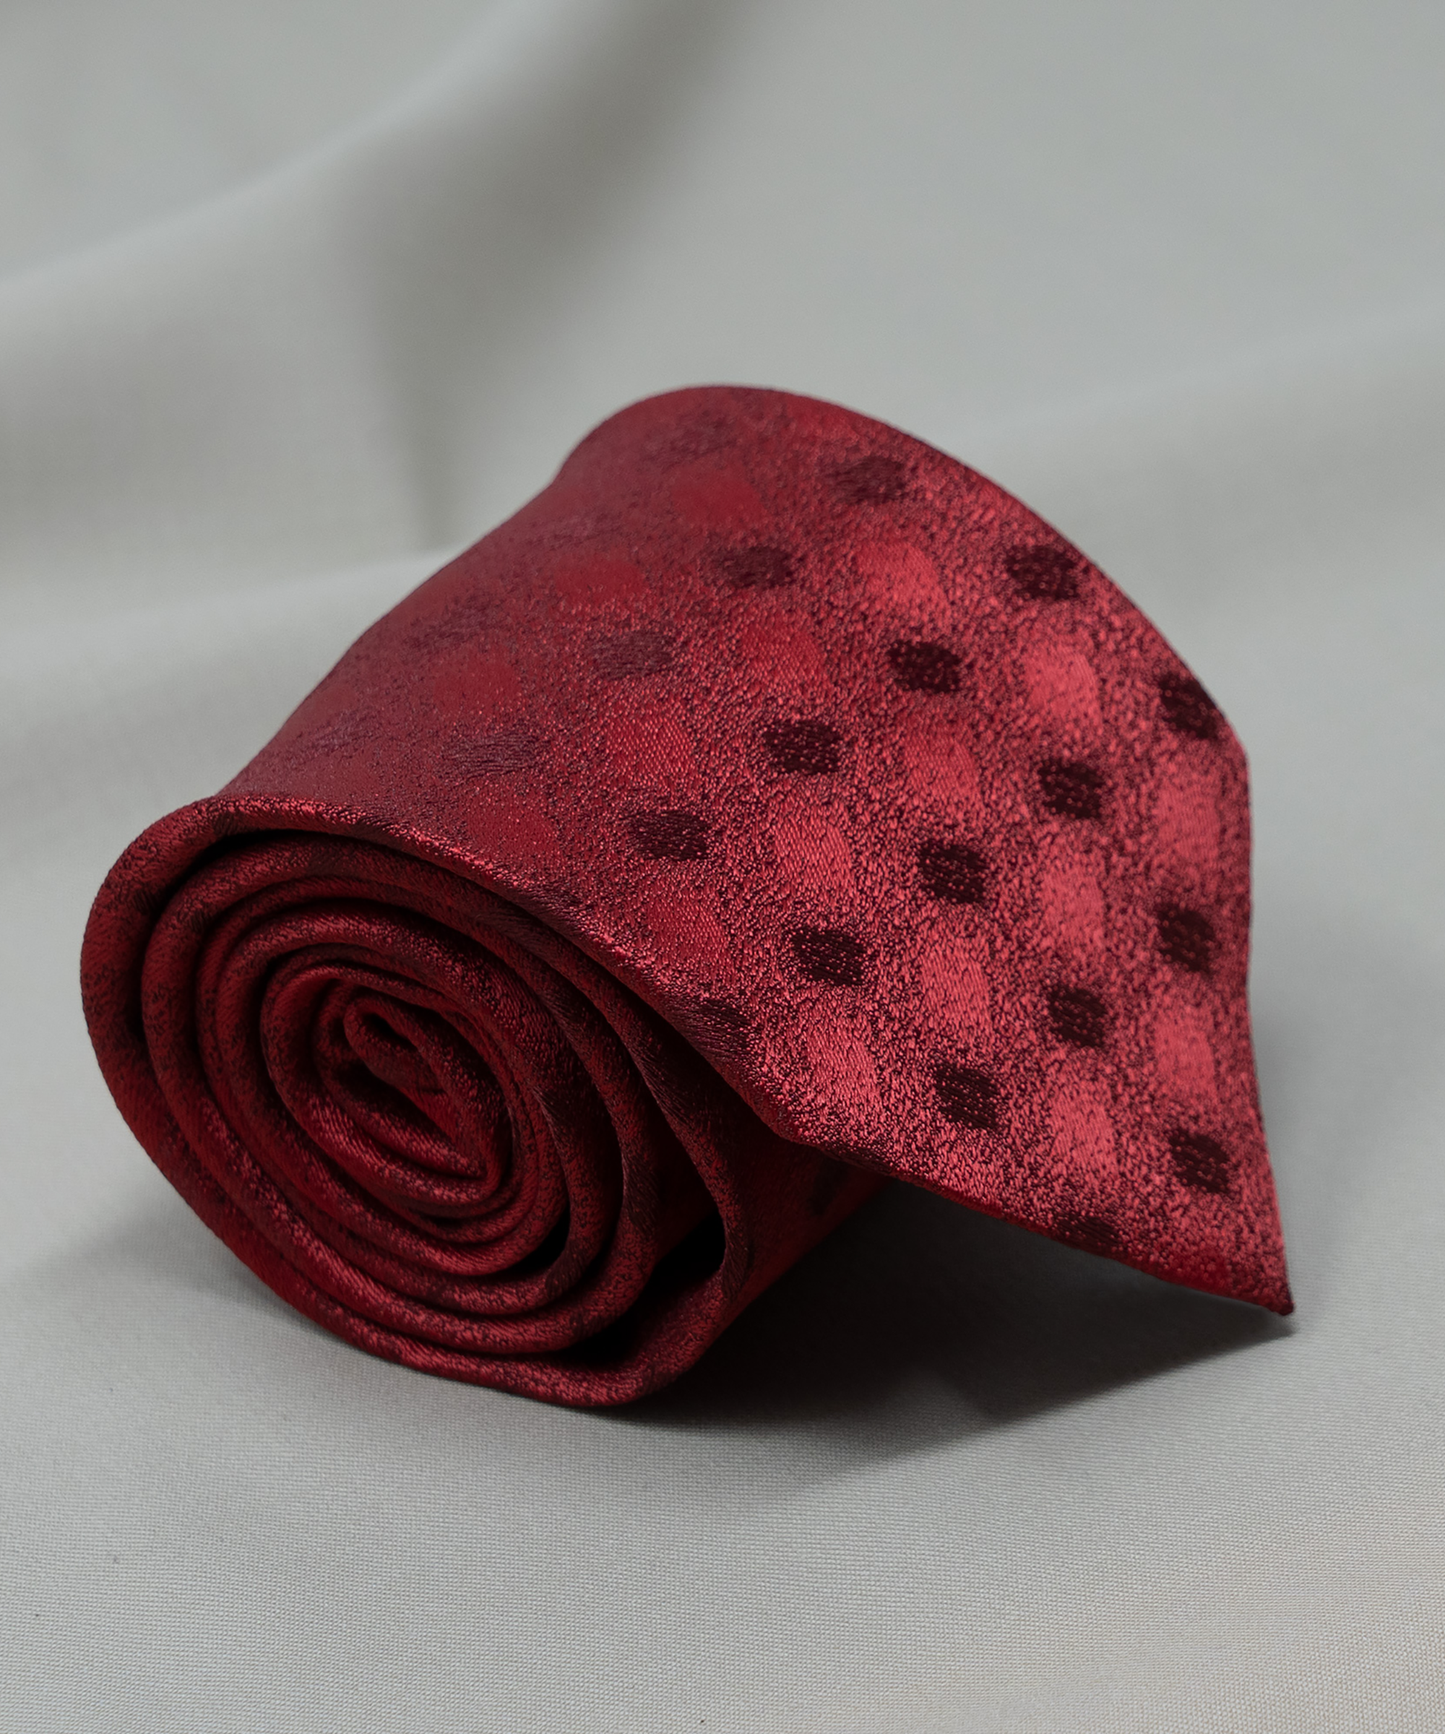 After 8 Red Geometric Necktie